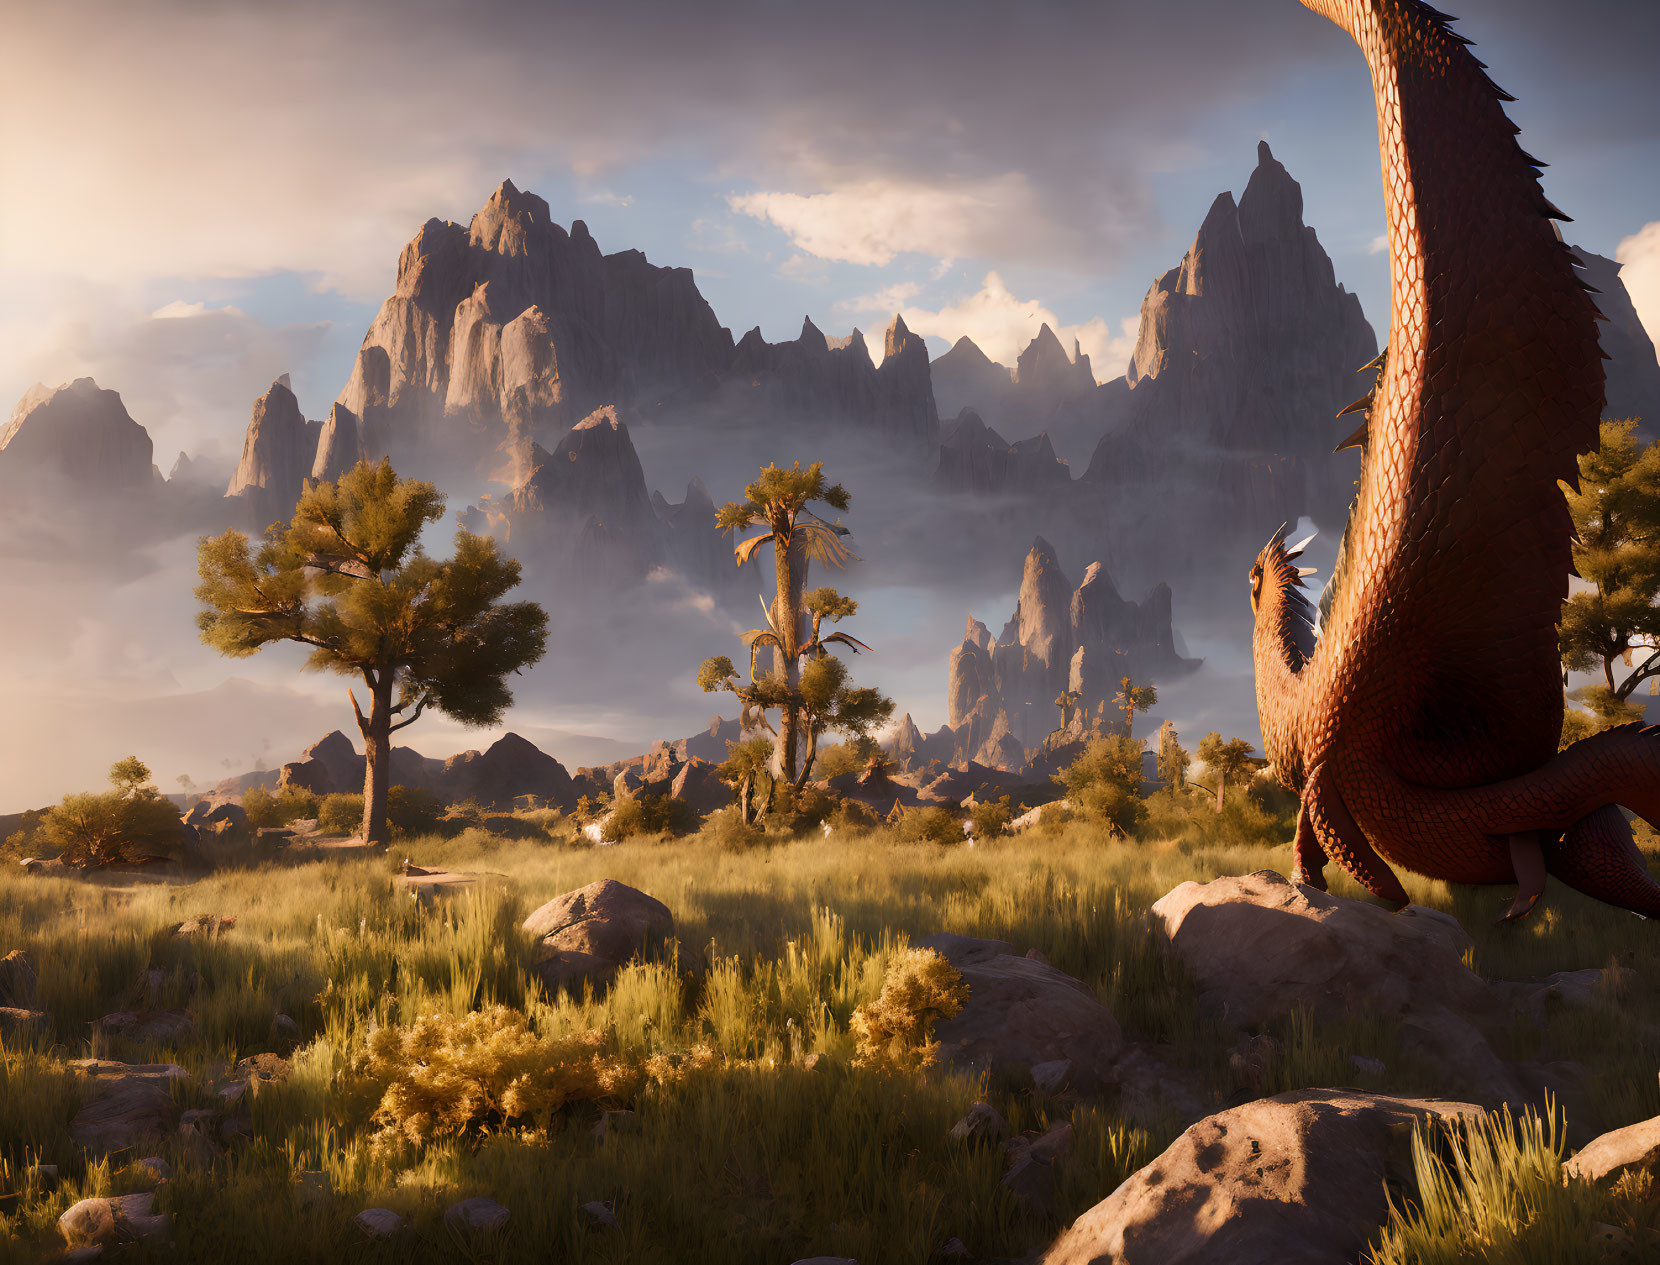 Prehistoric landscape with towering dinosaur and mountains.